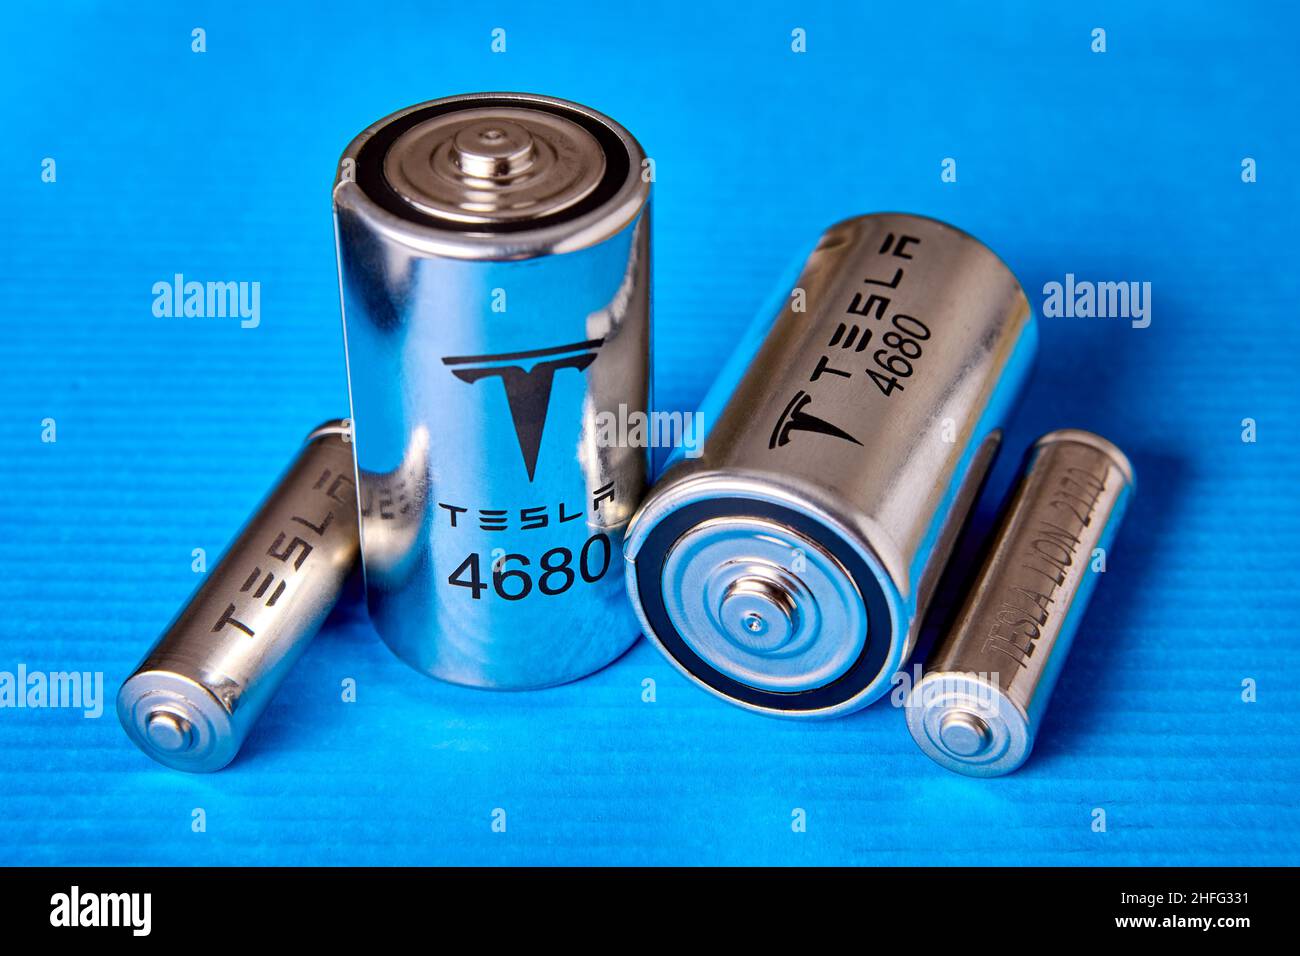 Tesla 2170 and 4680 battery cell comparison, St. Petersburg, Russia,  January 7, 2022 Stock Photo - Alamy